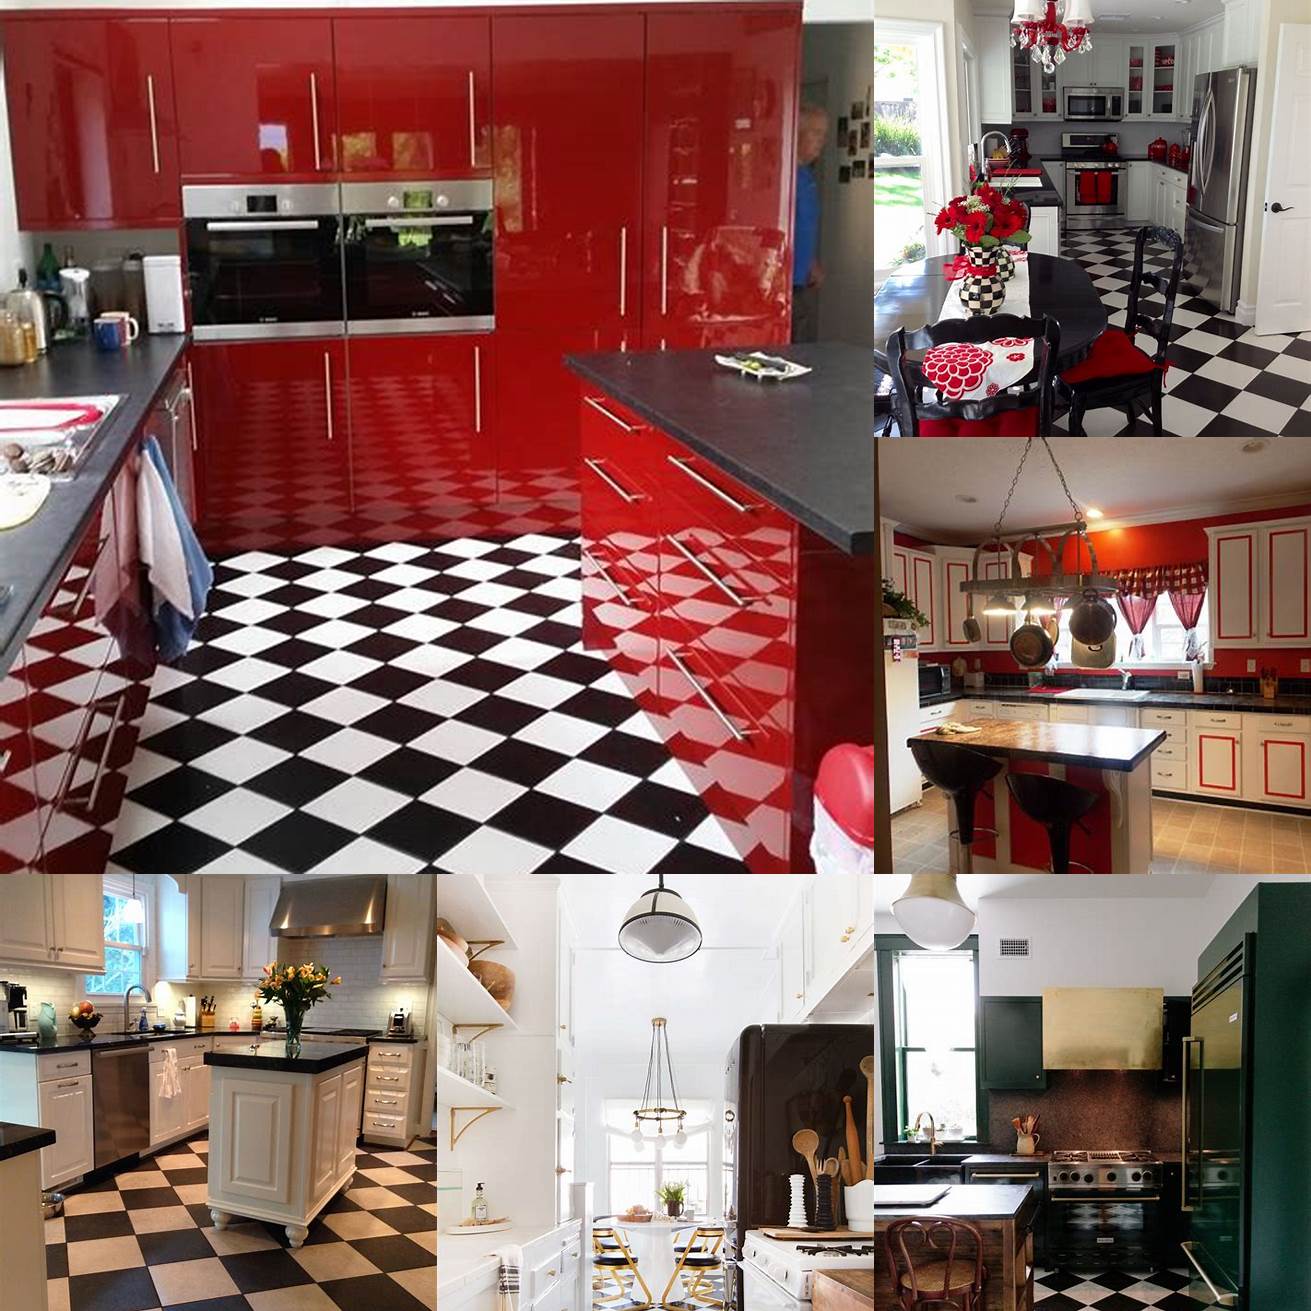 Red kitchen cabinets with black and white checkered floors